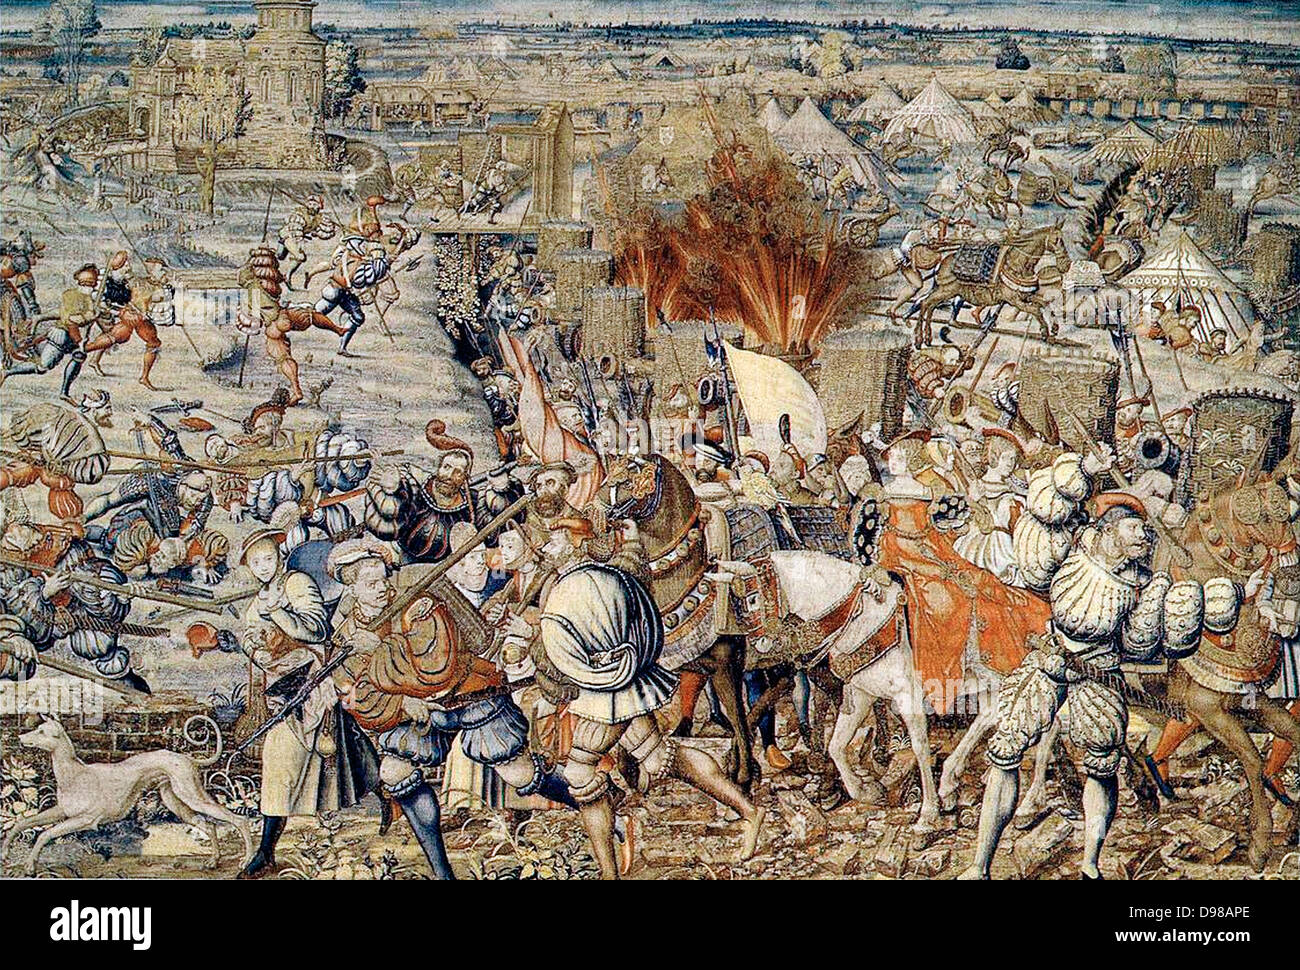 The Battle of Pavia, February 24, 1525, was the decisive engagement of the  Italian War of 1521-25. A Spanish-Imperial army under the command of  Charles de Lannoy attacked the French army under